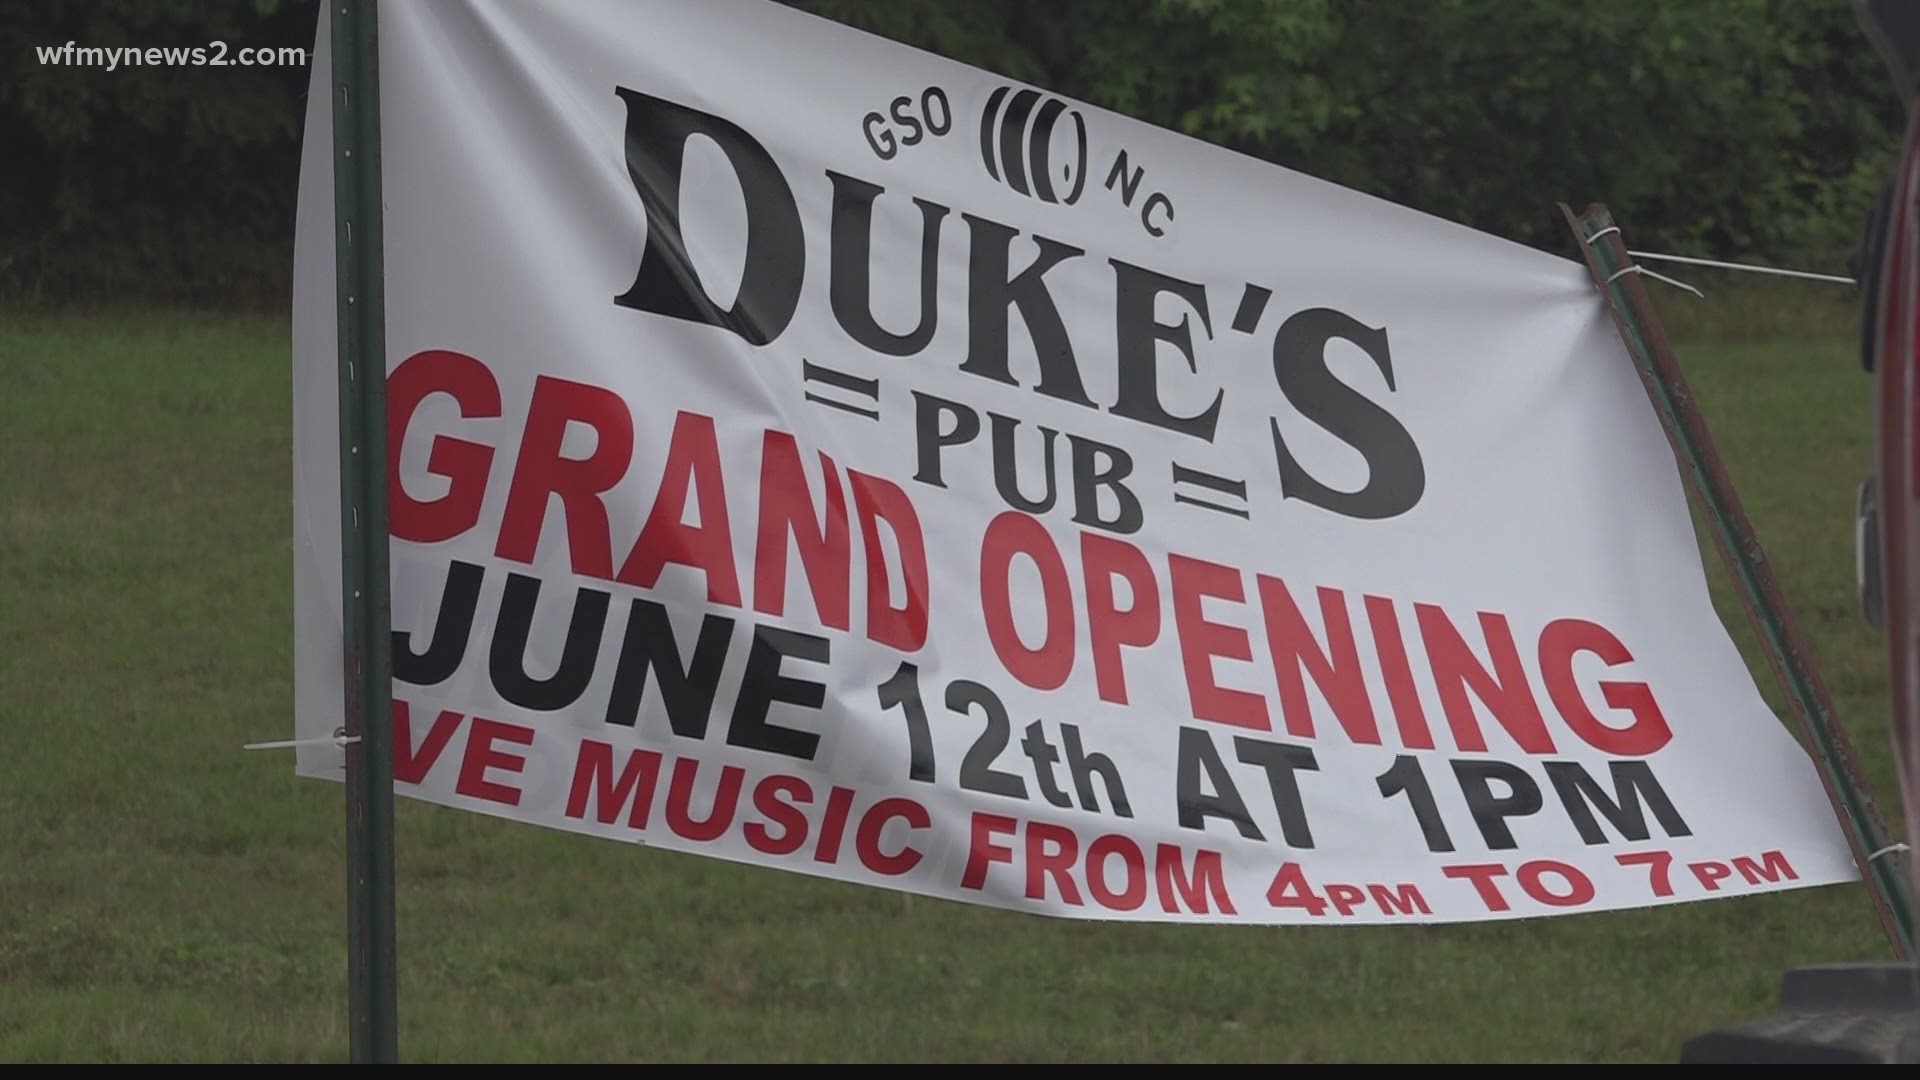 Duke’s Pub grand opening is Saturday. The pub is taking over the former Cellar 23 wine store.